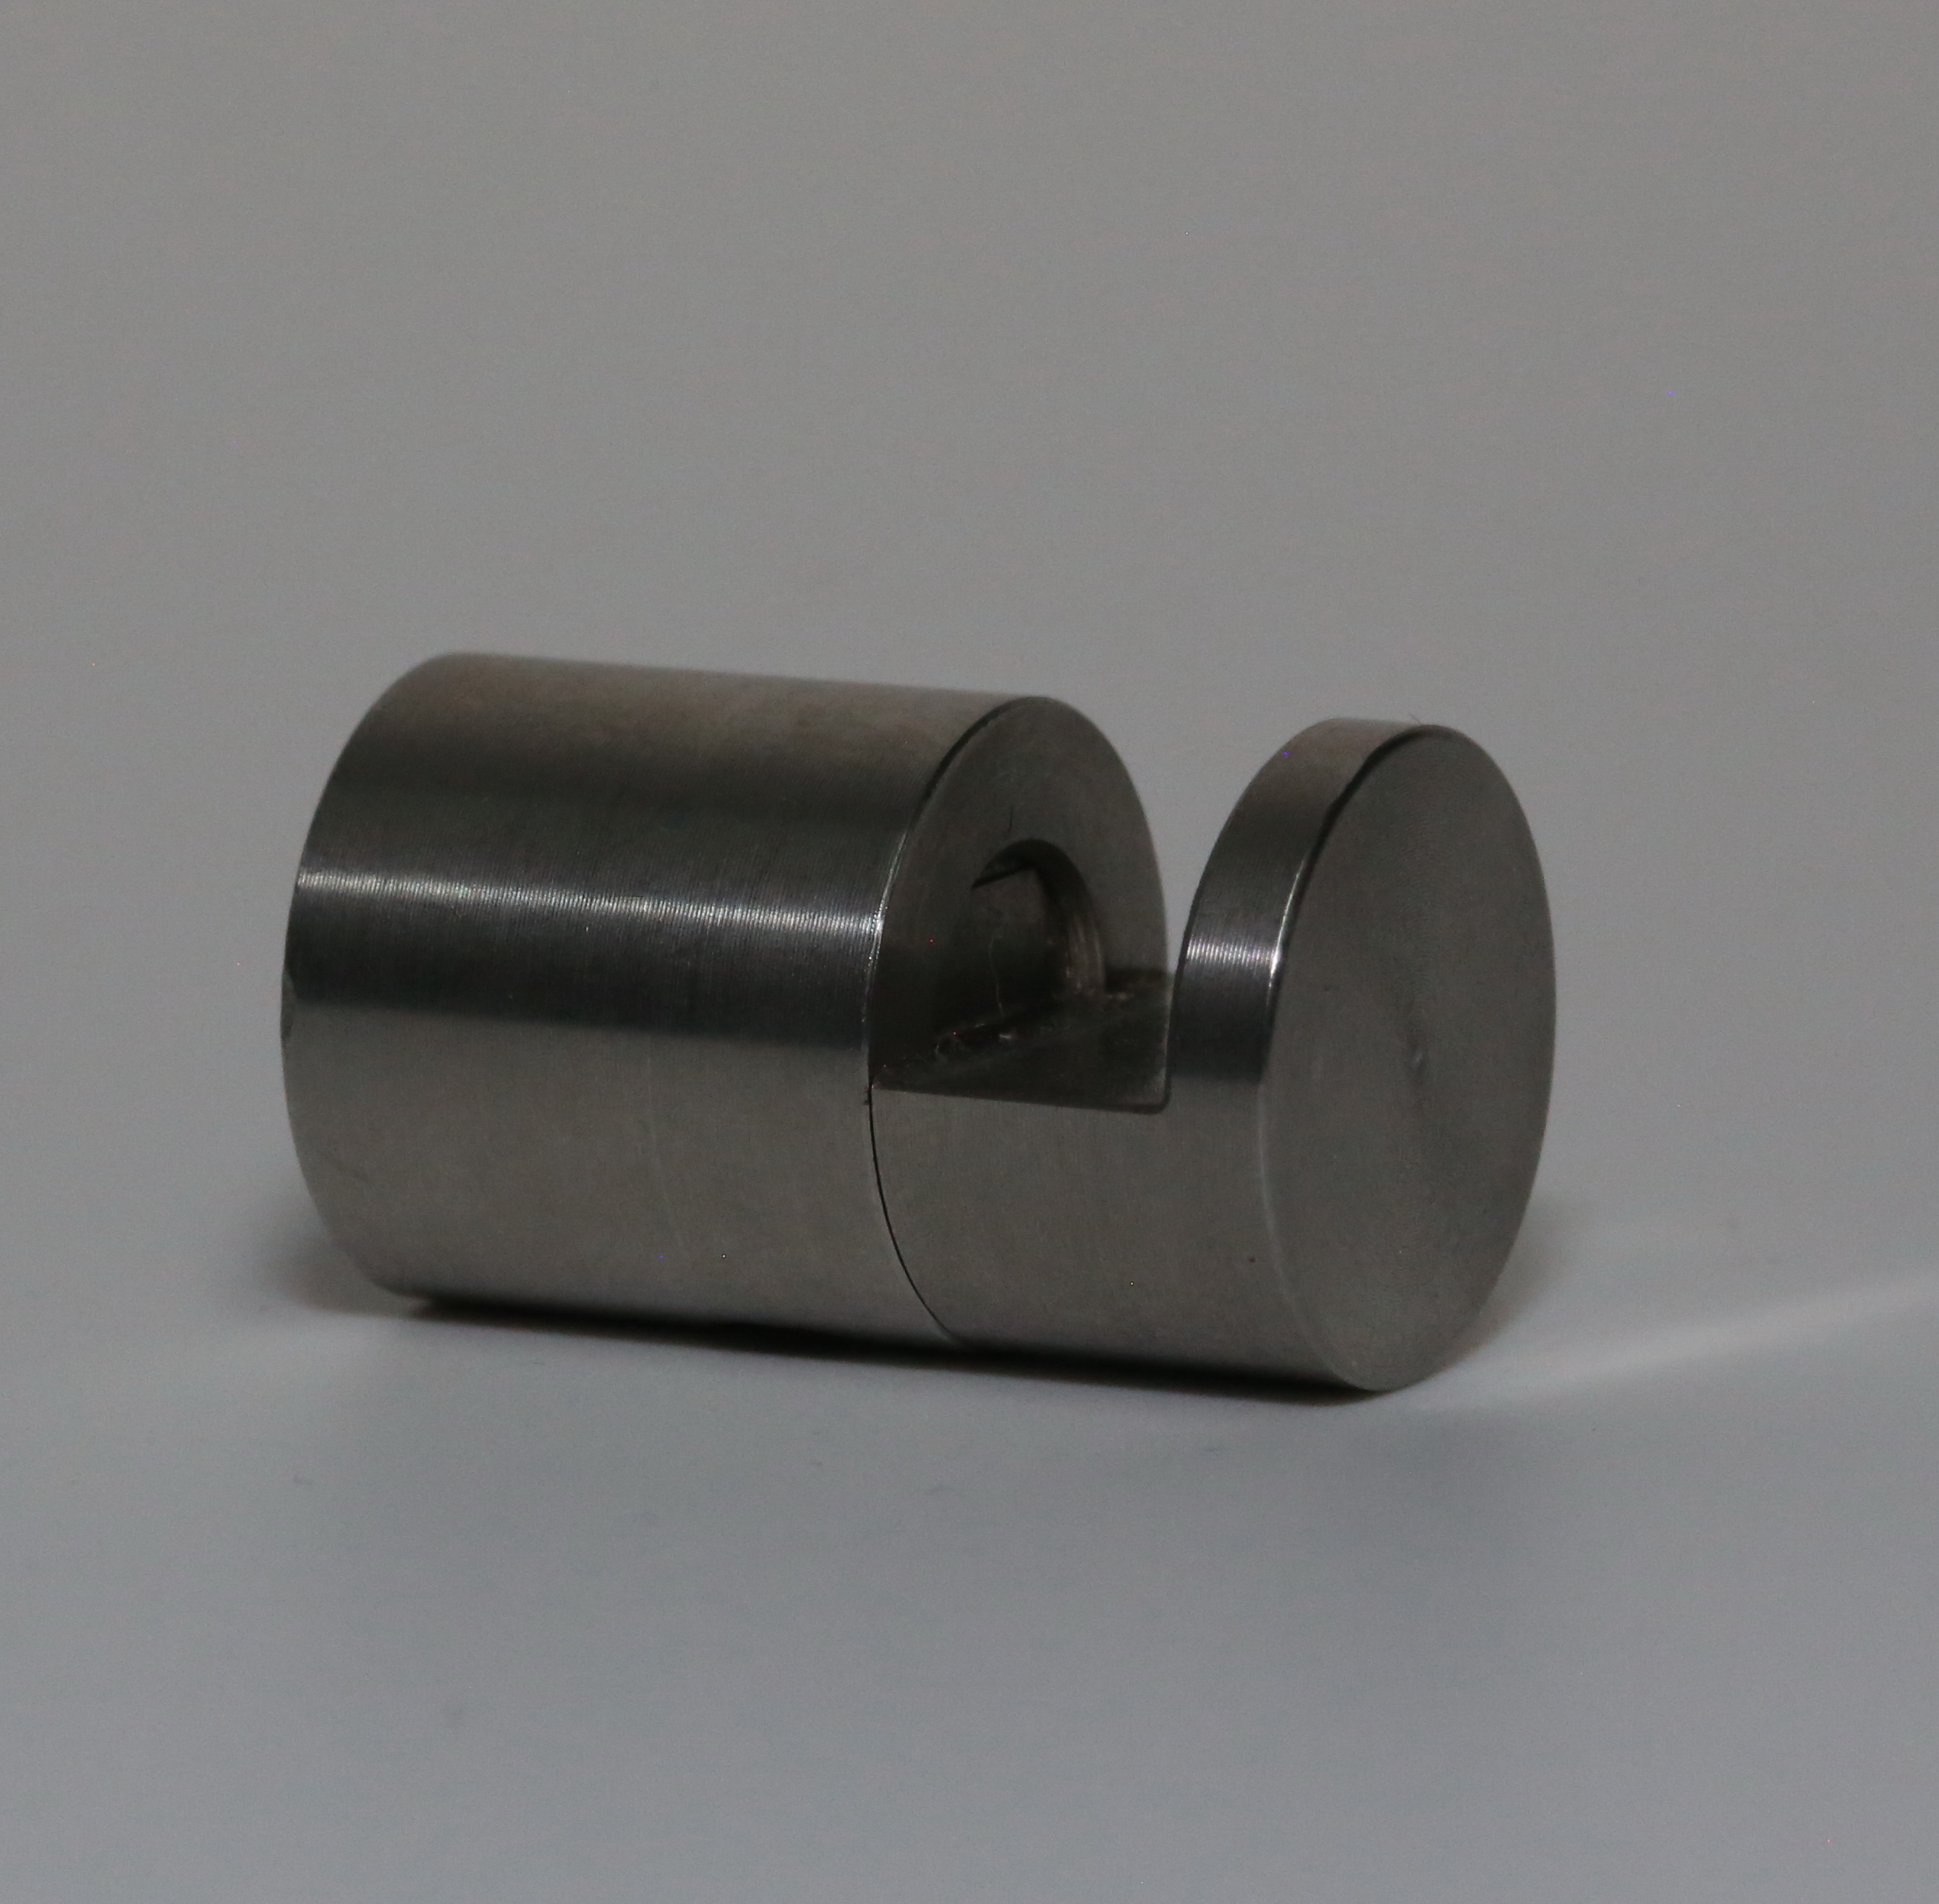 Stainless steel distance holder with clamp for 8mm glass